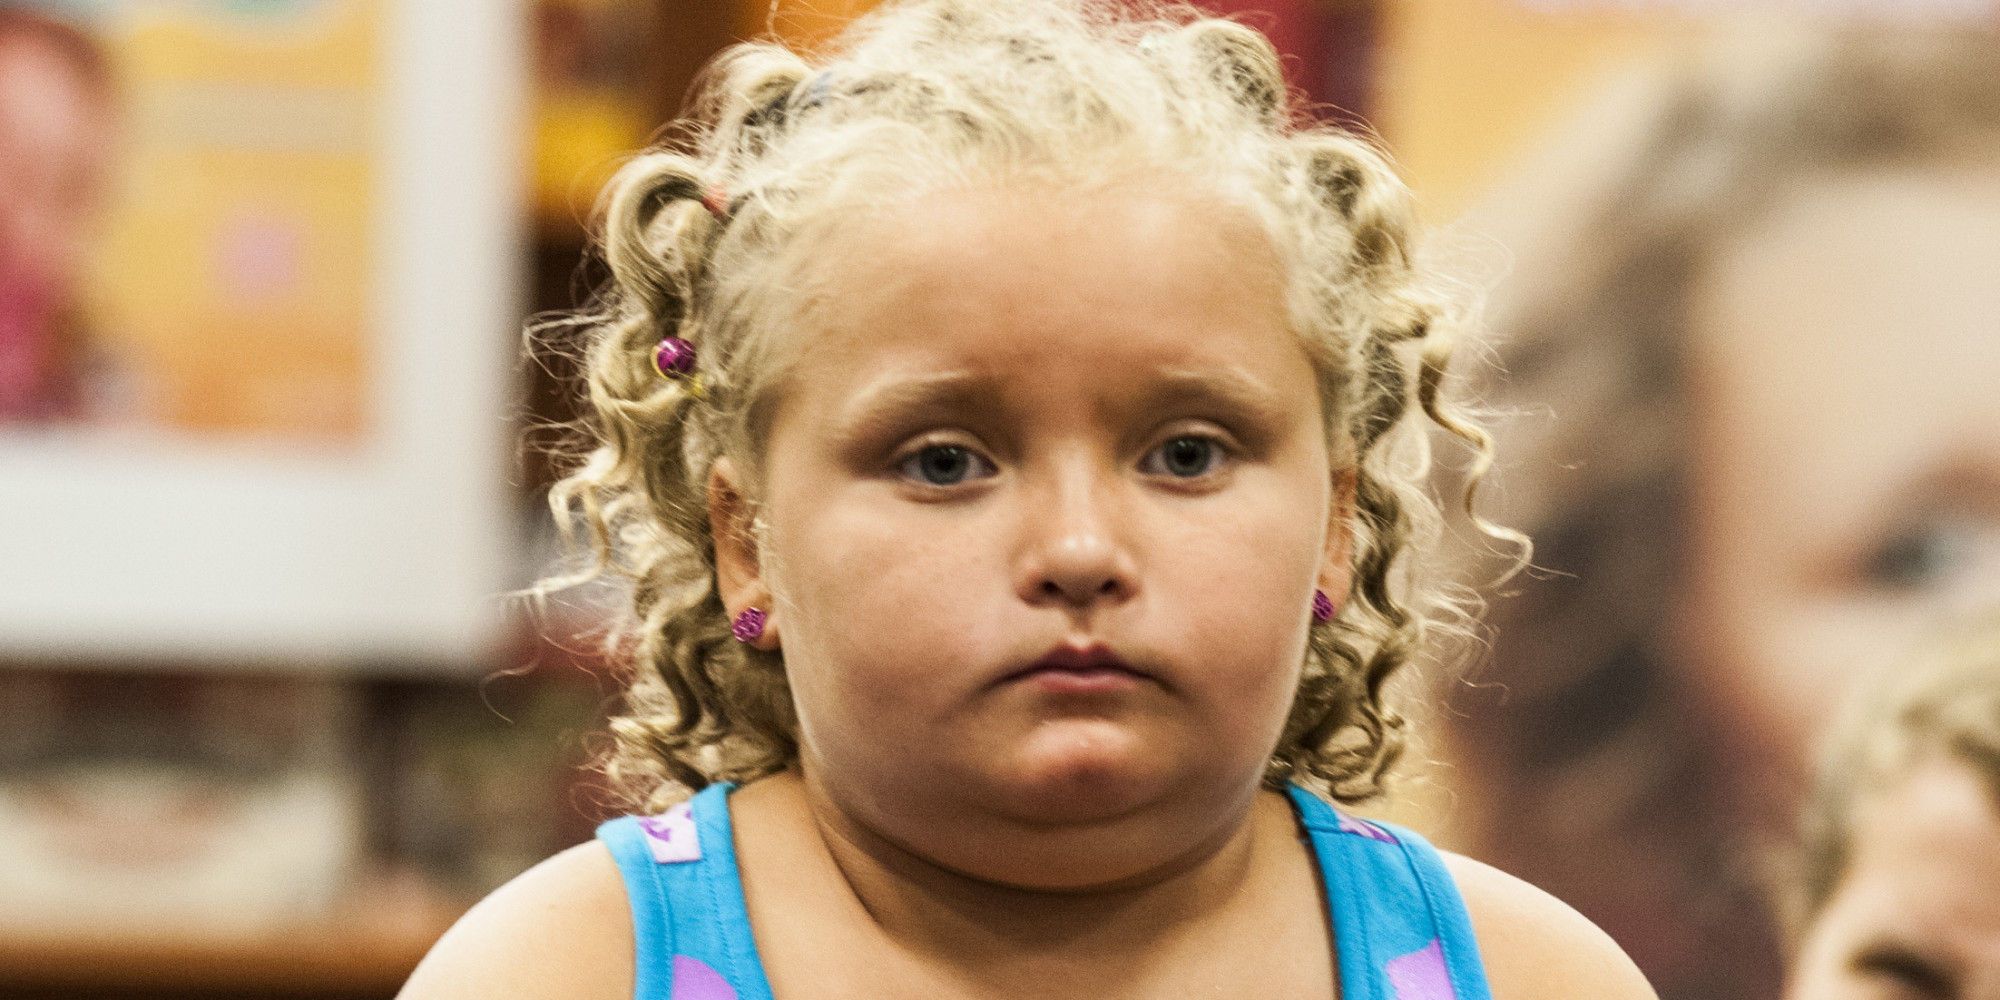 Honey Boo Boo - Worst Spinoffs Based on Hit TV Shows